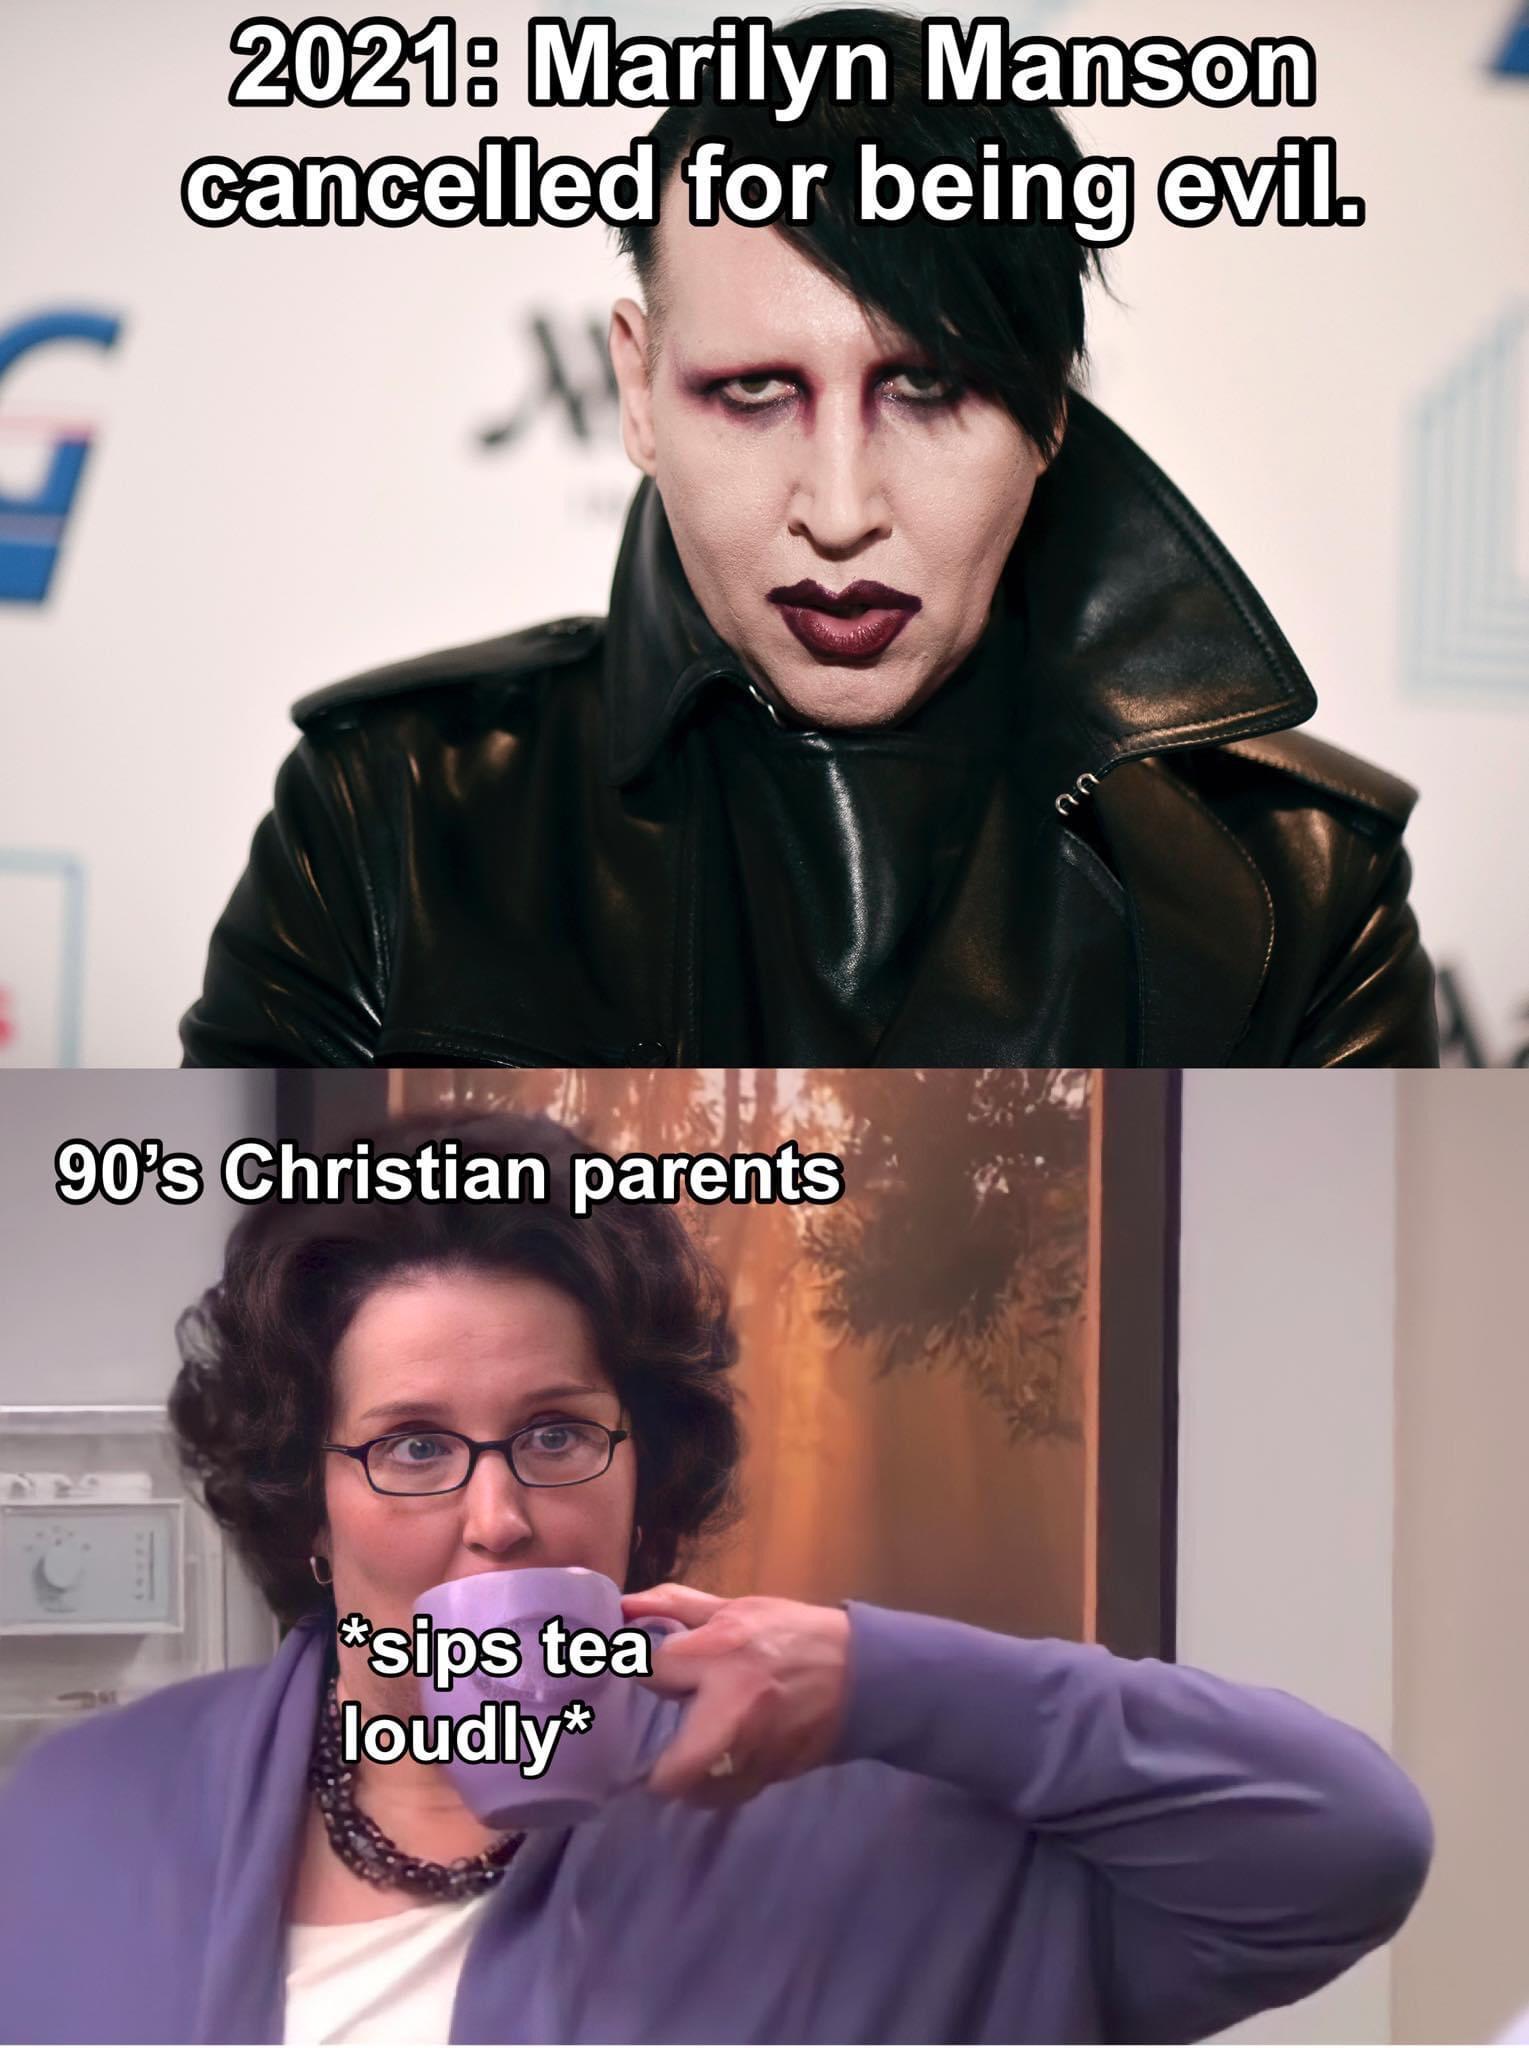 funny memes and pics - Evan Rachel Wood - 2021 Marilyn Manson cancelled for being evil. W 3 90's Christian parents sips tea loudly